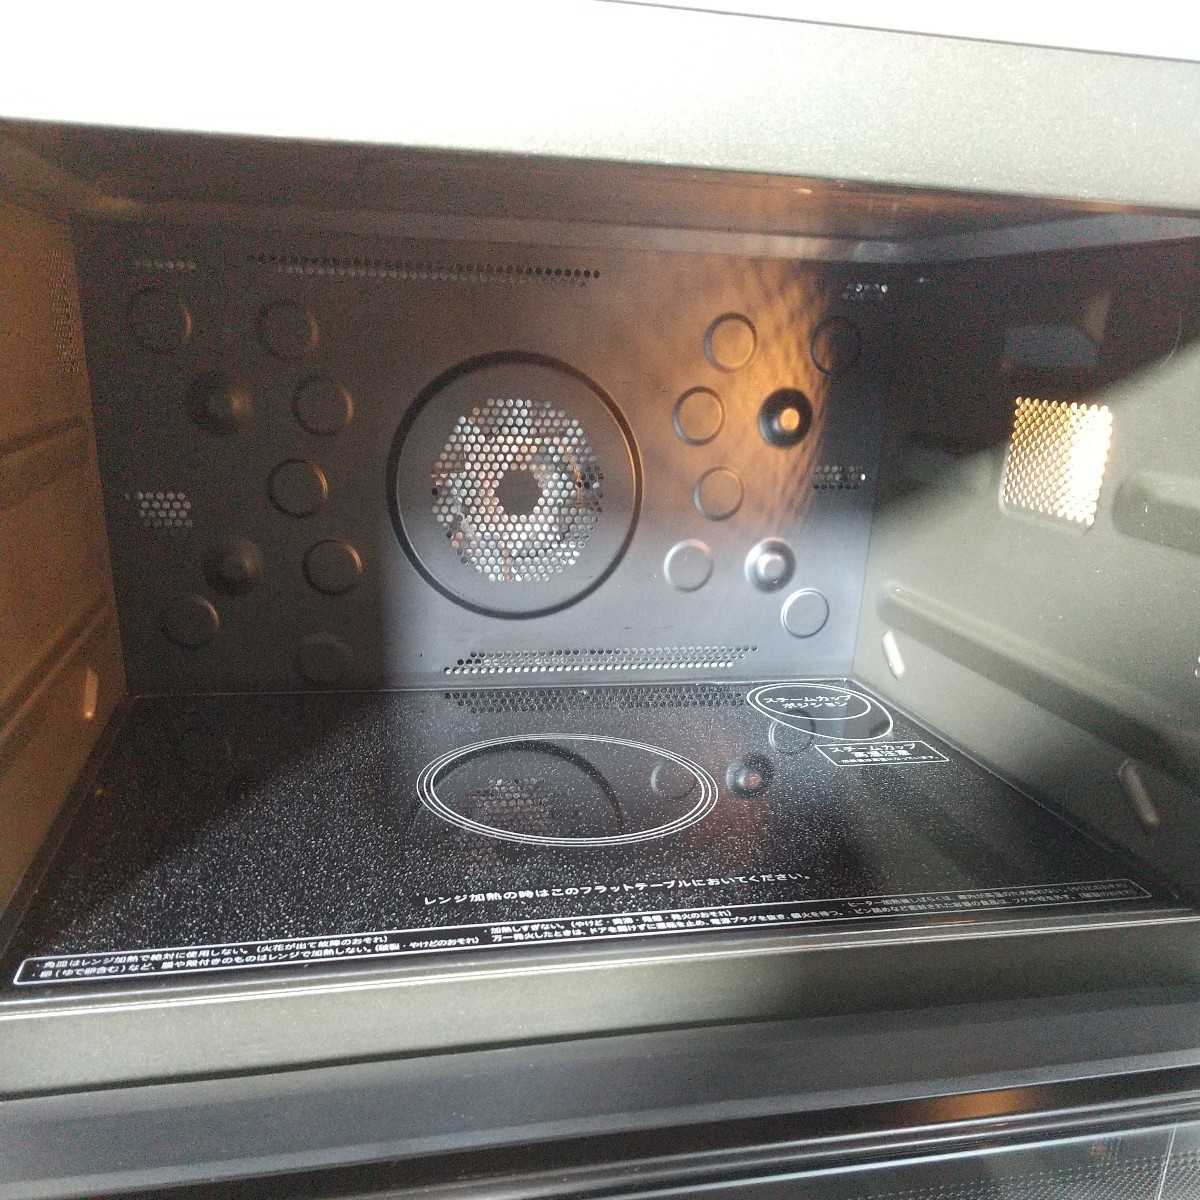 y022701t SHARP microwave oven RE-SS10X-W 2021 year made cooking consumer electronics .. water steam range 